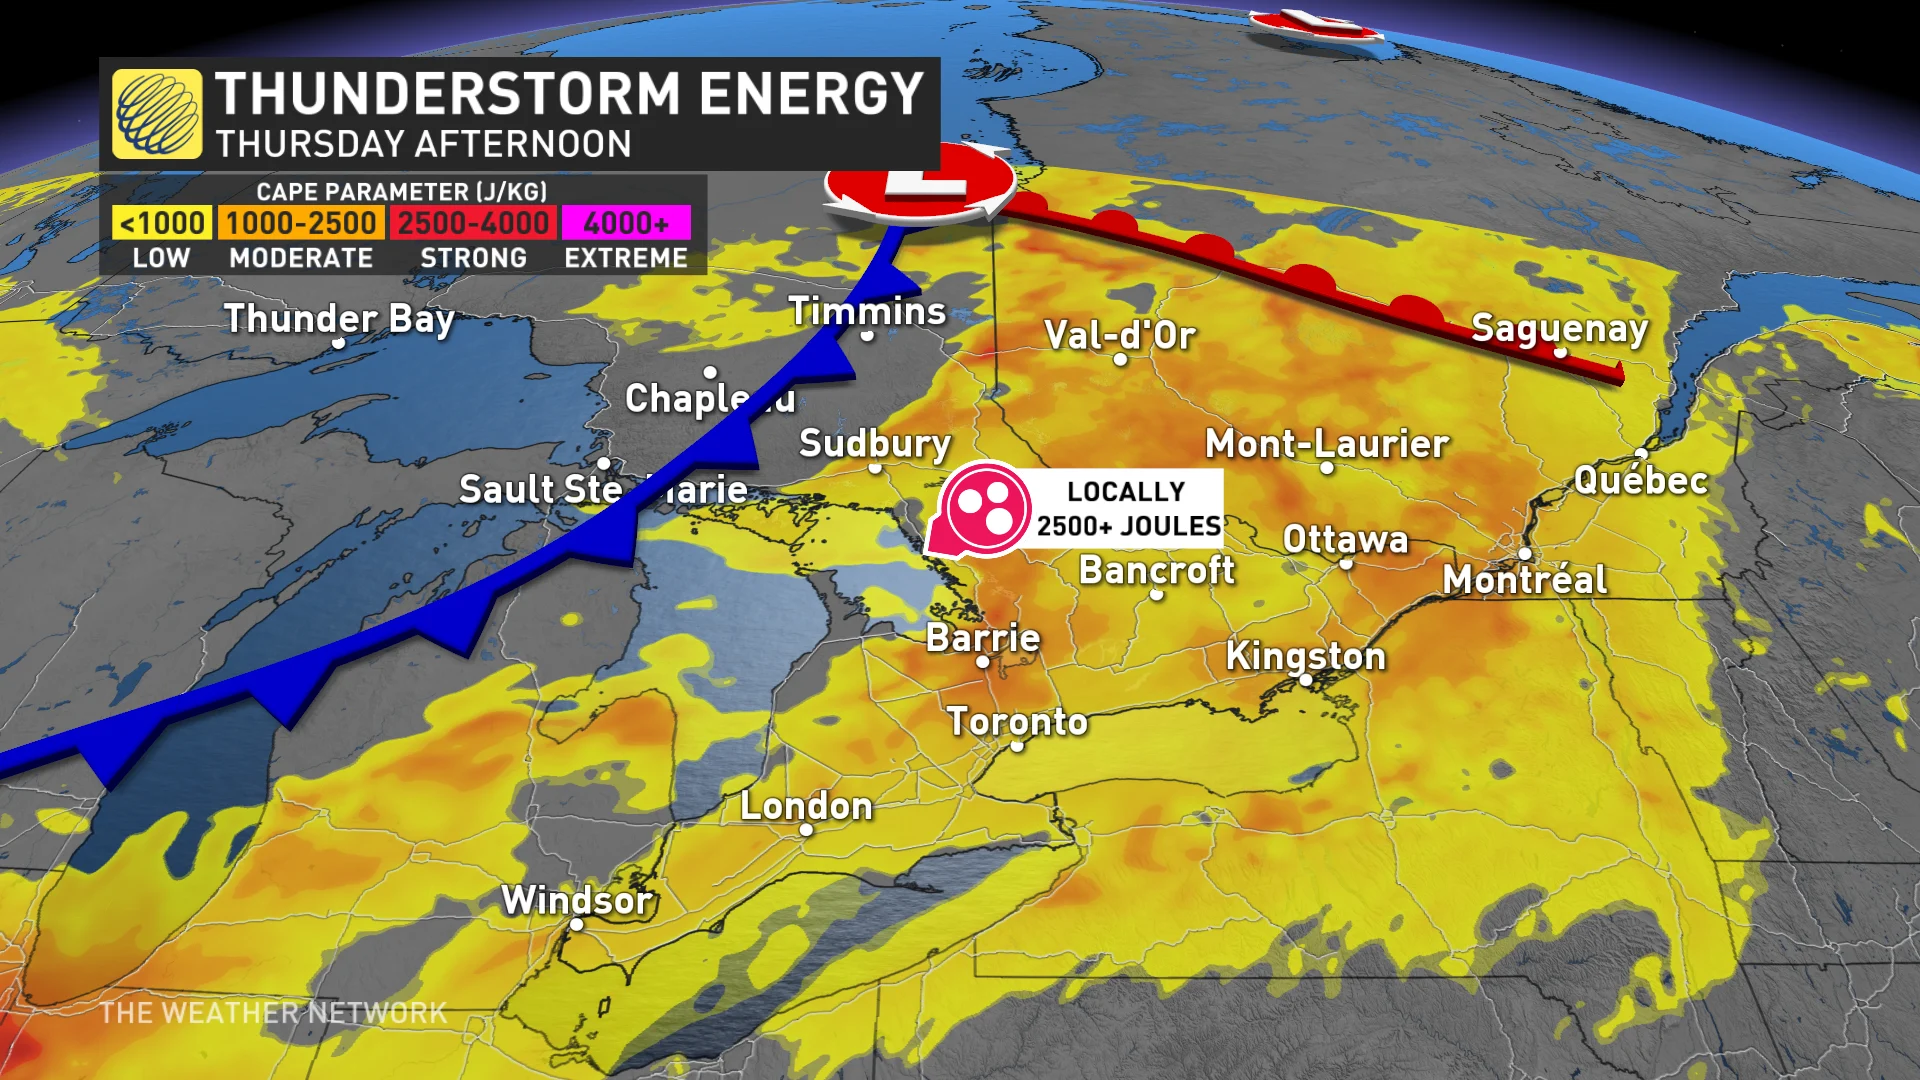 Baron - Thunderstorm energy Thursday afternoon southern Ontario - June12